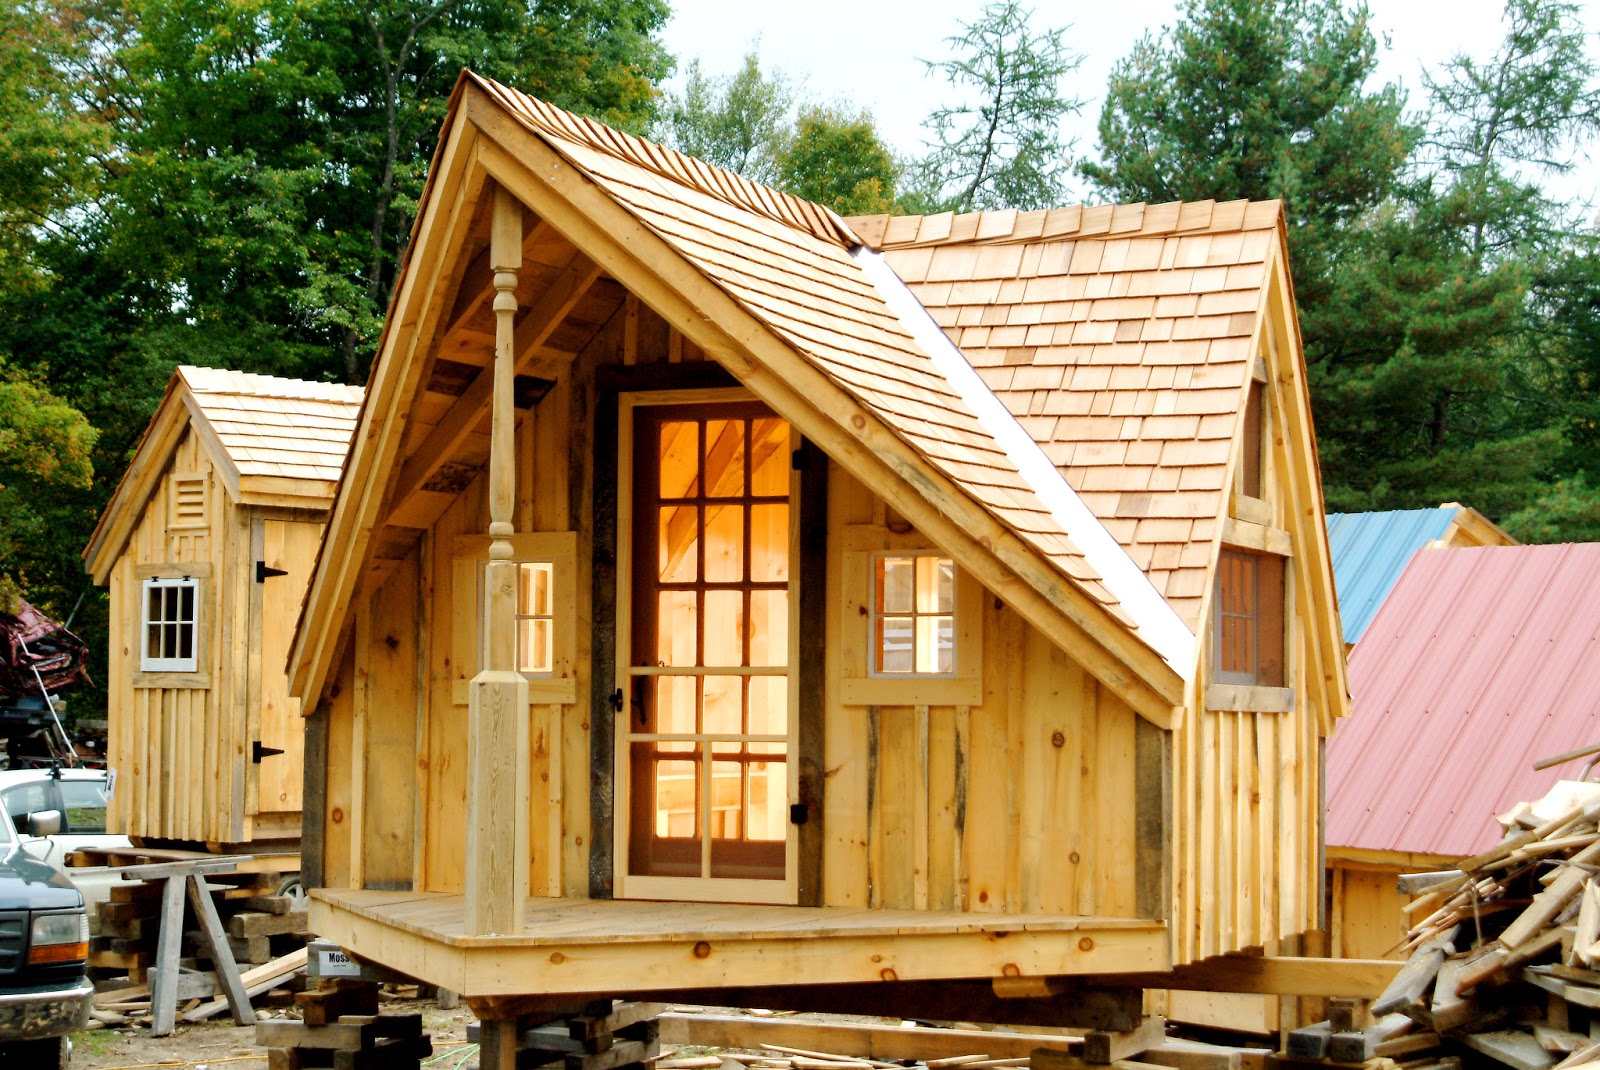 WIN a full set of Jamaica Cottage Shop Cabin/Tiny House Plans